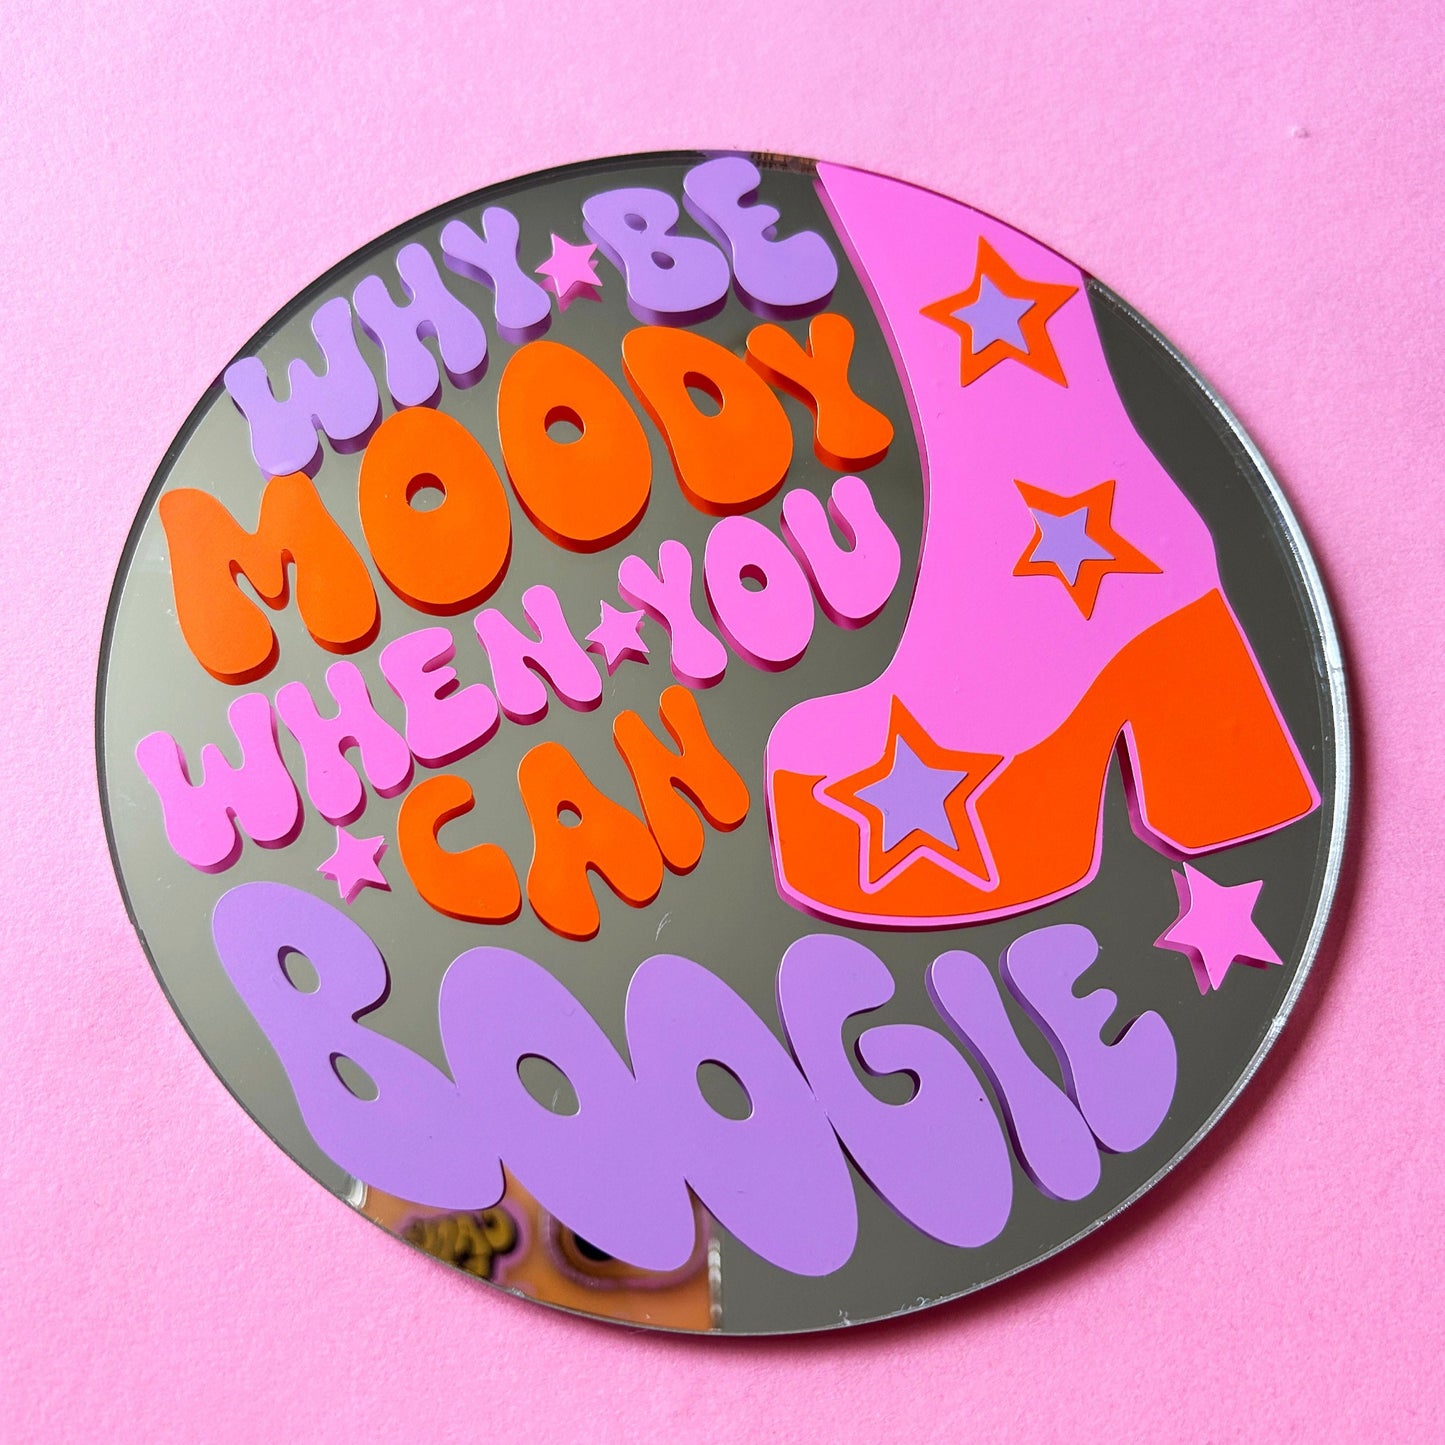 Don't Be Moody, Let's Boogie Disc Mirror